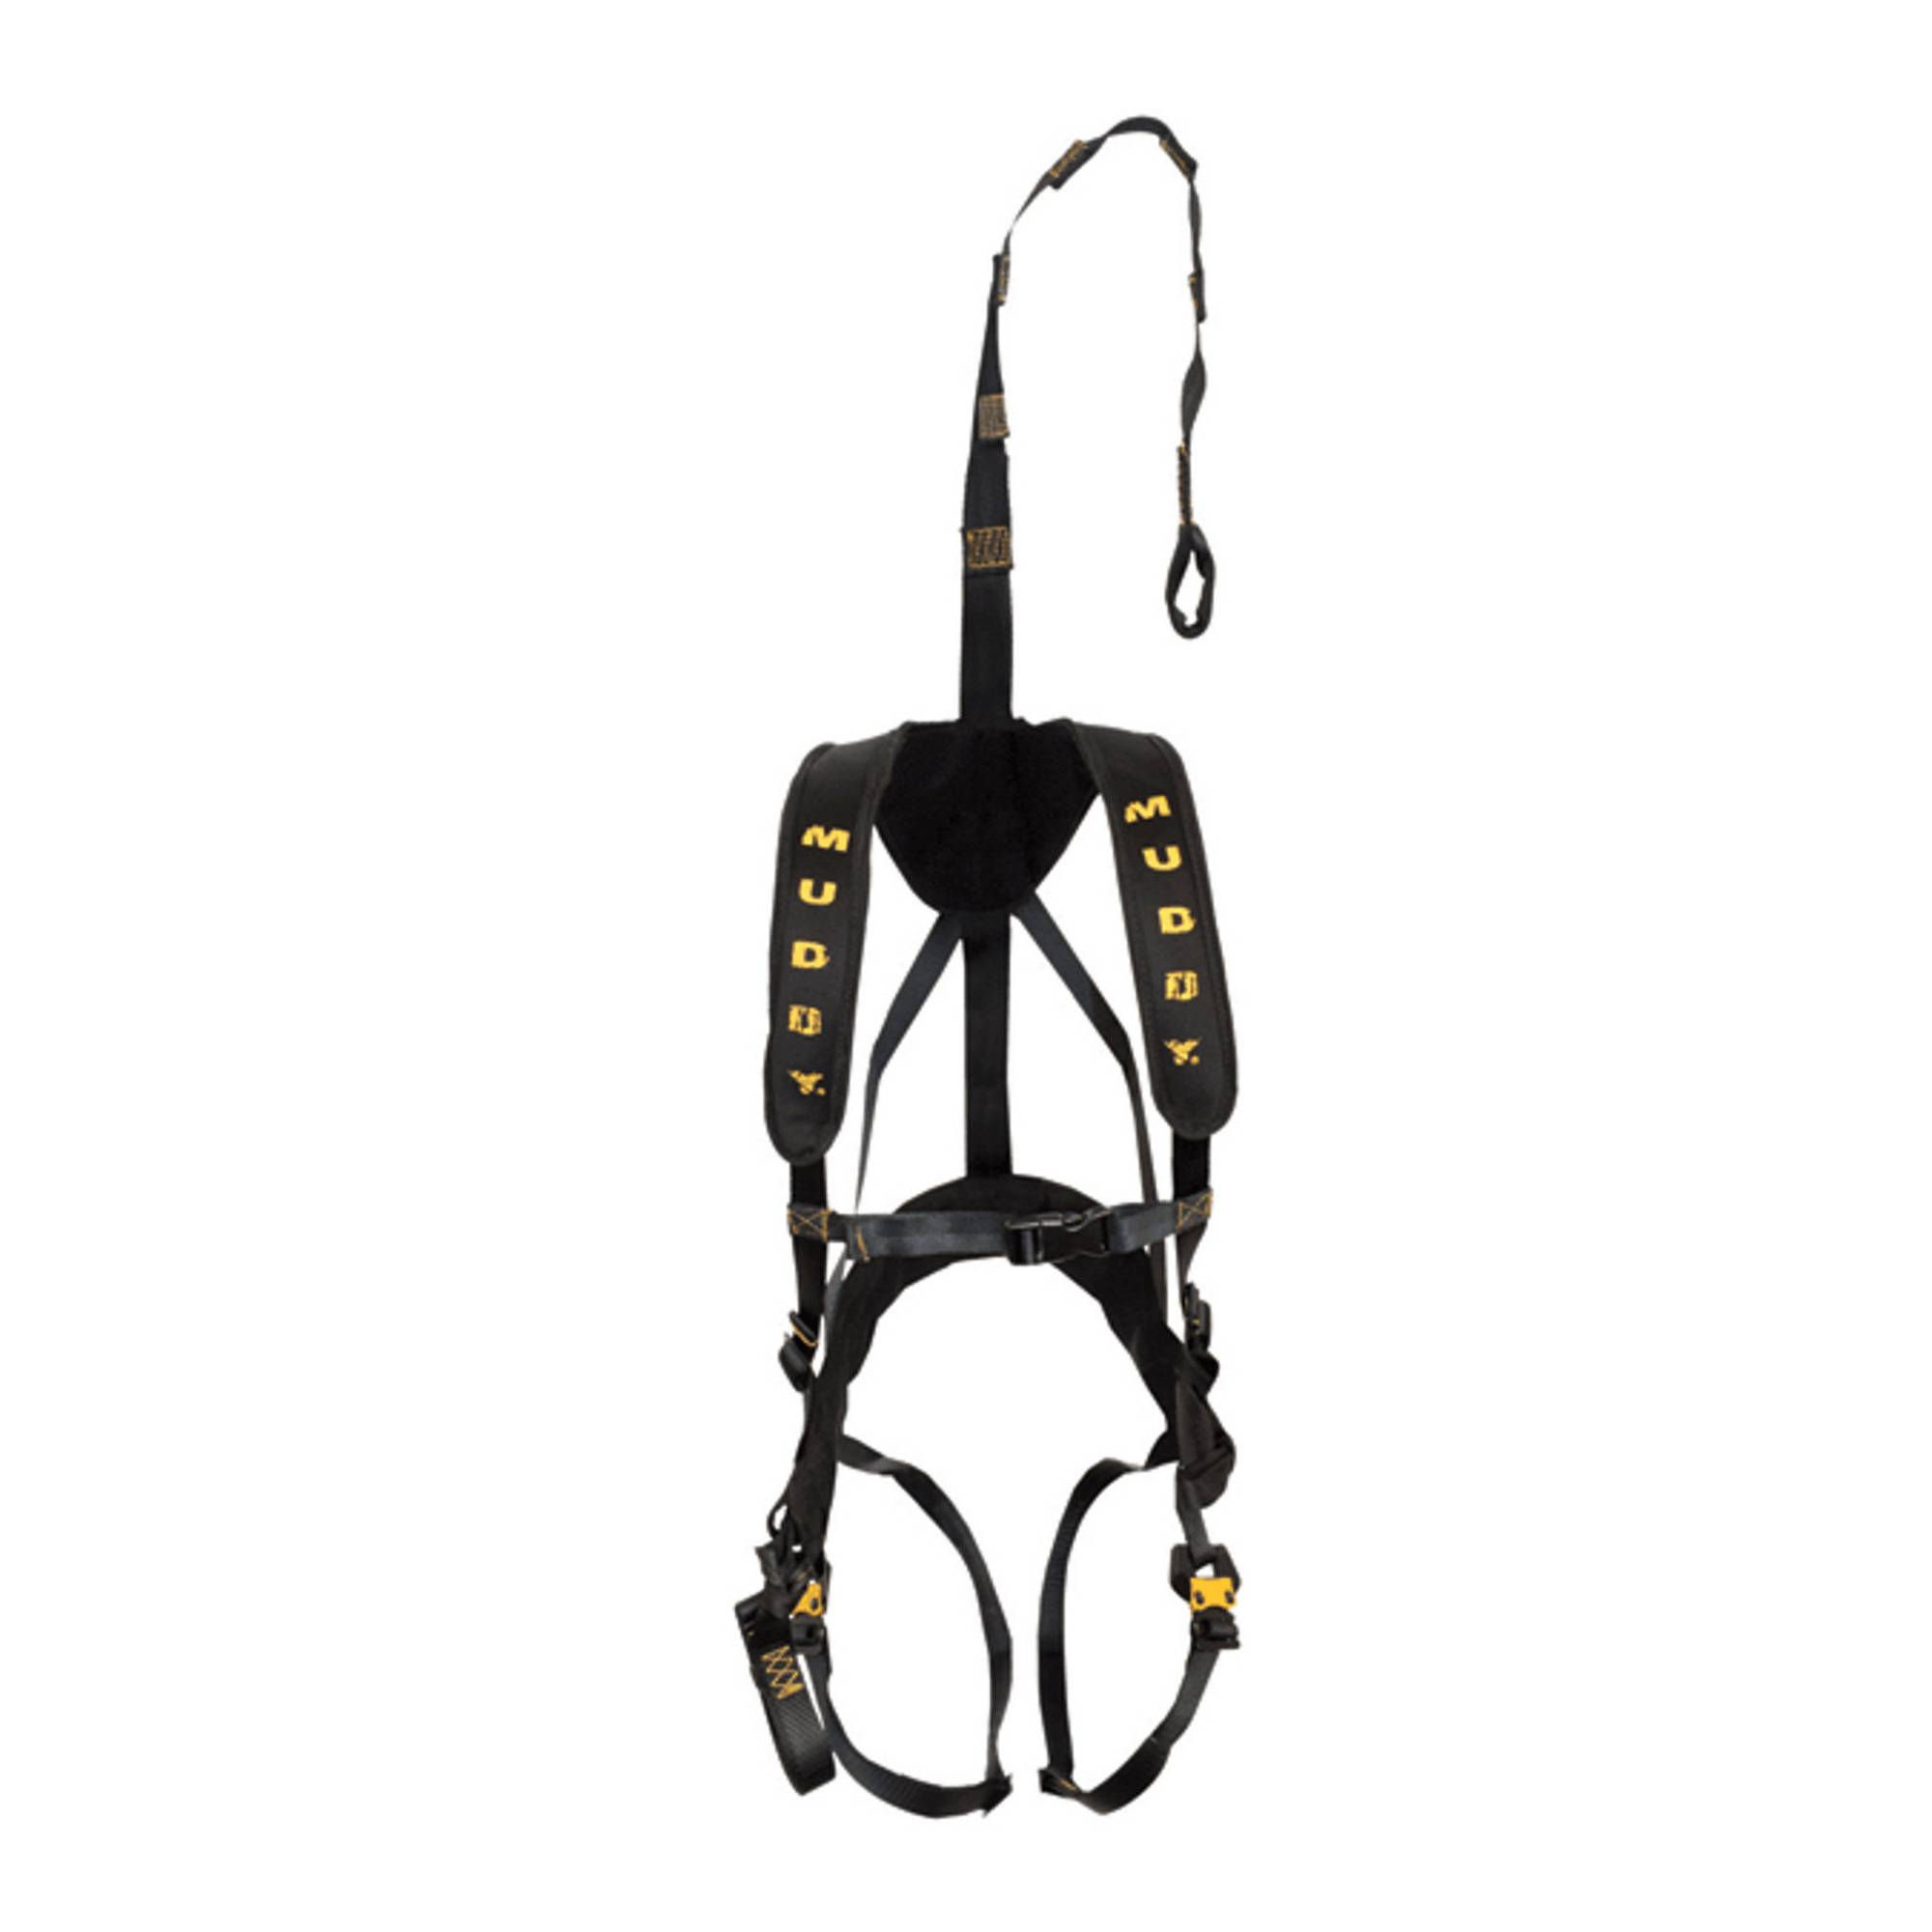 Muddy Magnum Elite Safety Harness with Standard Quick-Release